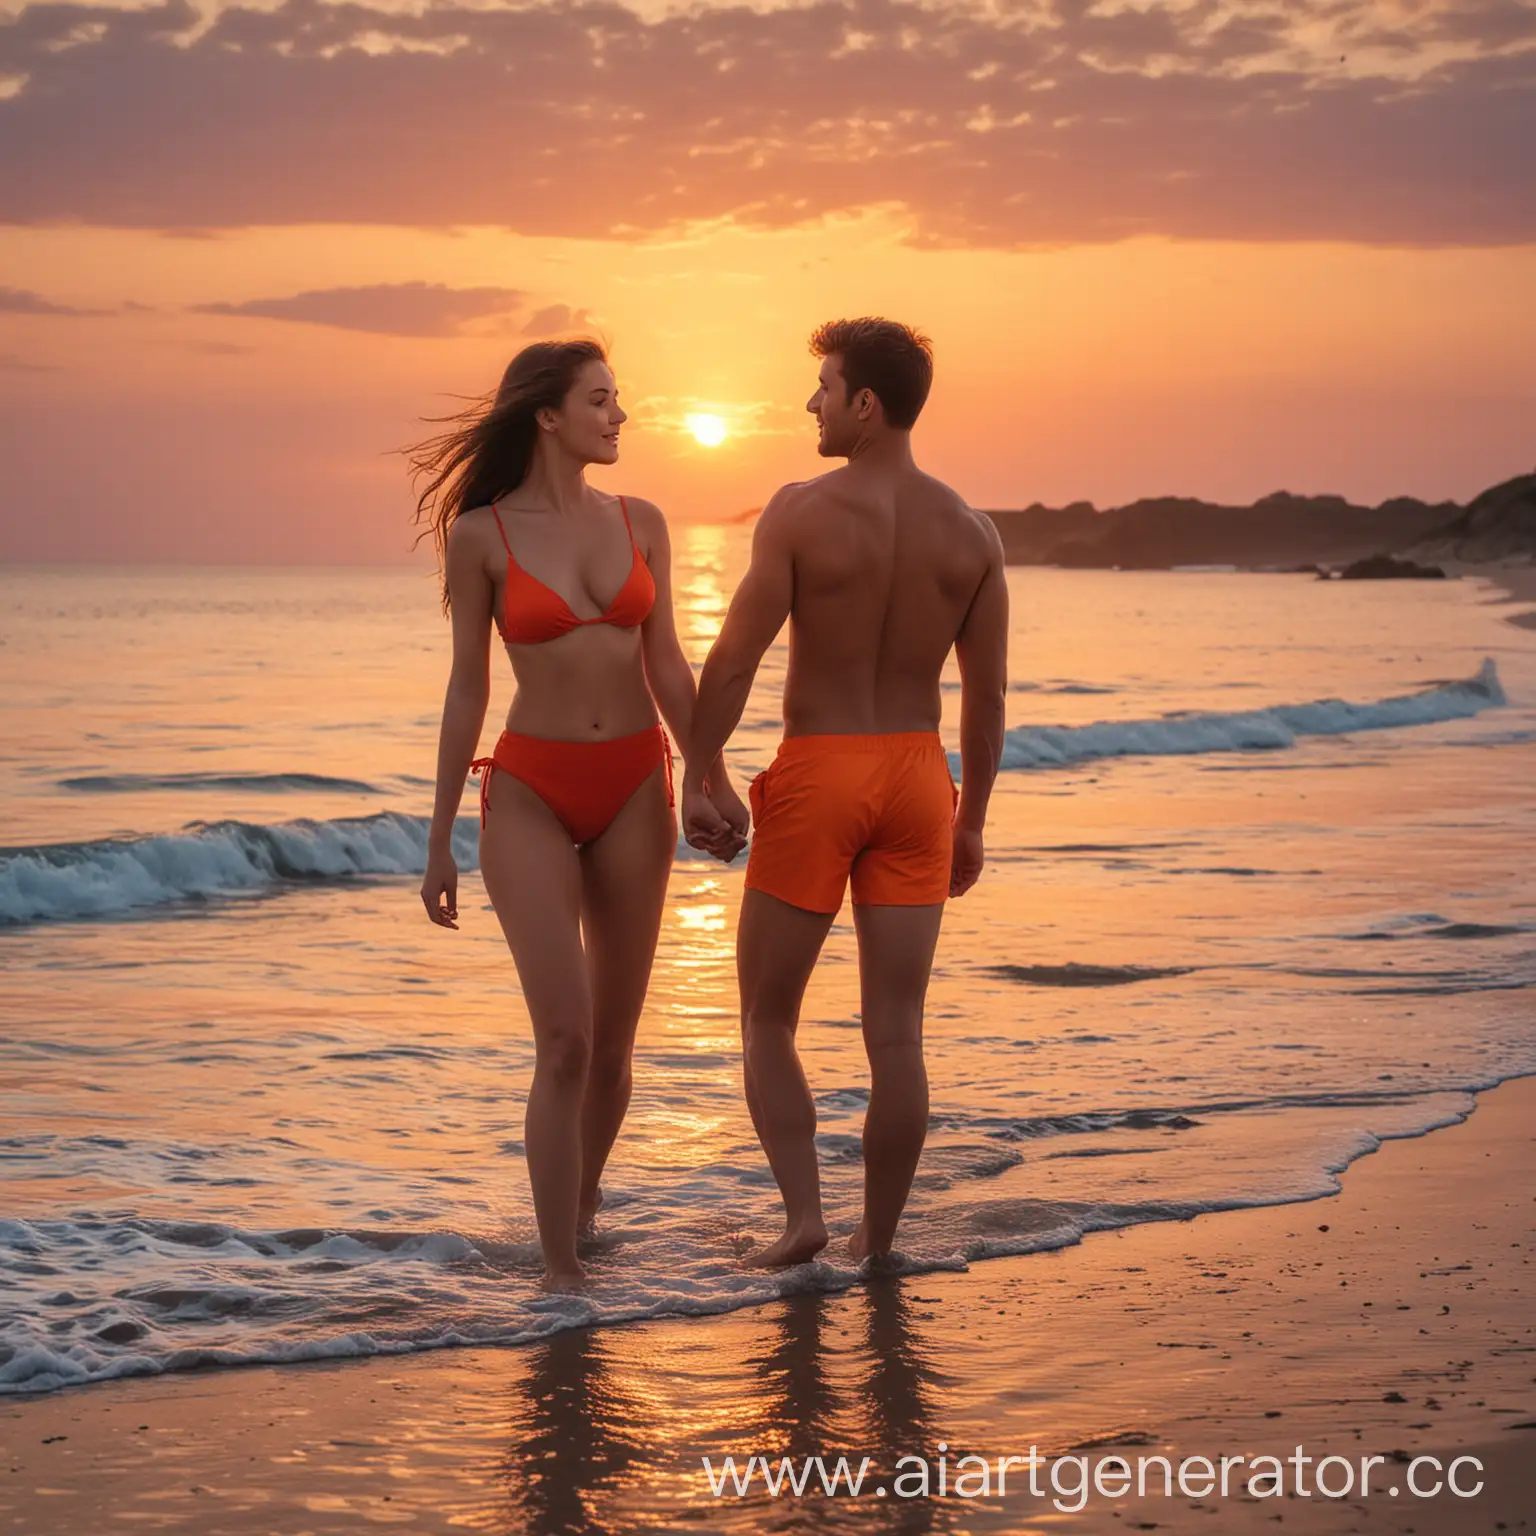 Stylish-Couple-Enjoying-Sunset-Beach-Moment-Handsome-Guy-and-Girl-in-Swimsuits